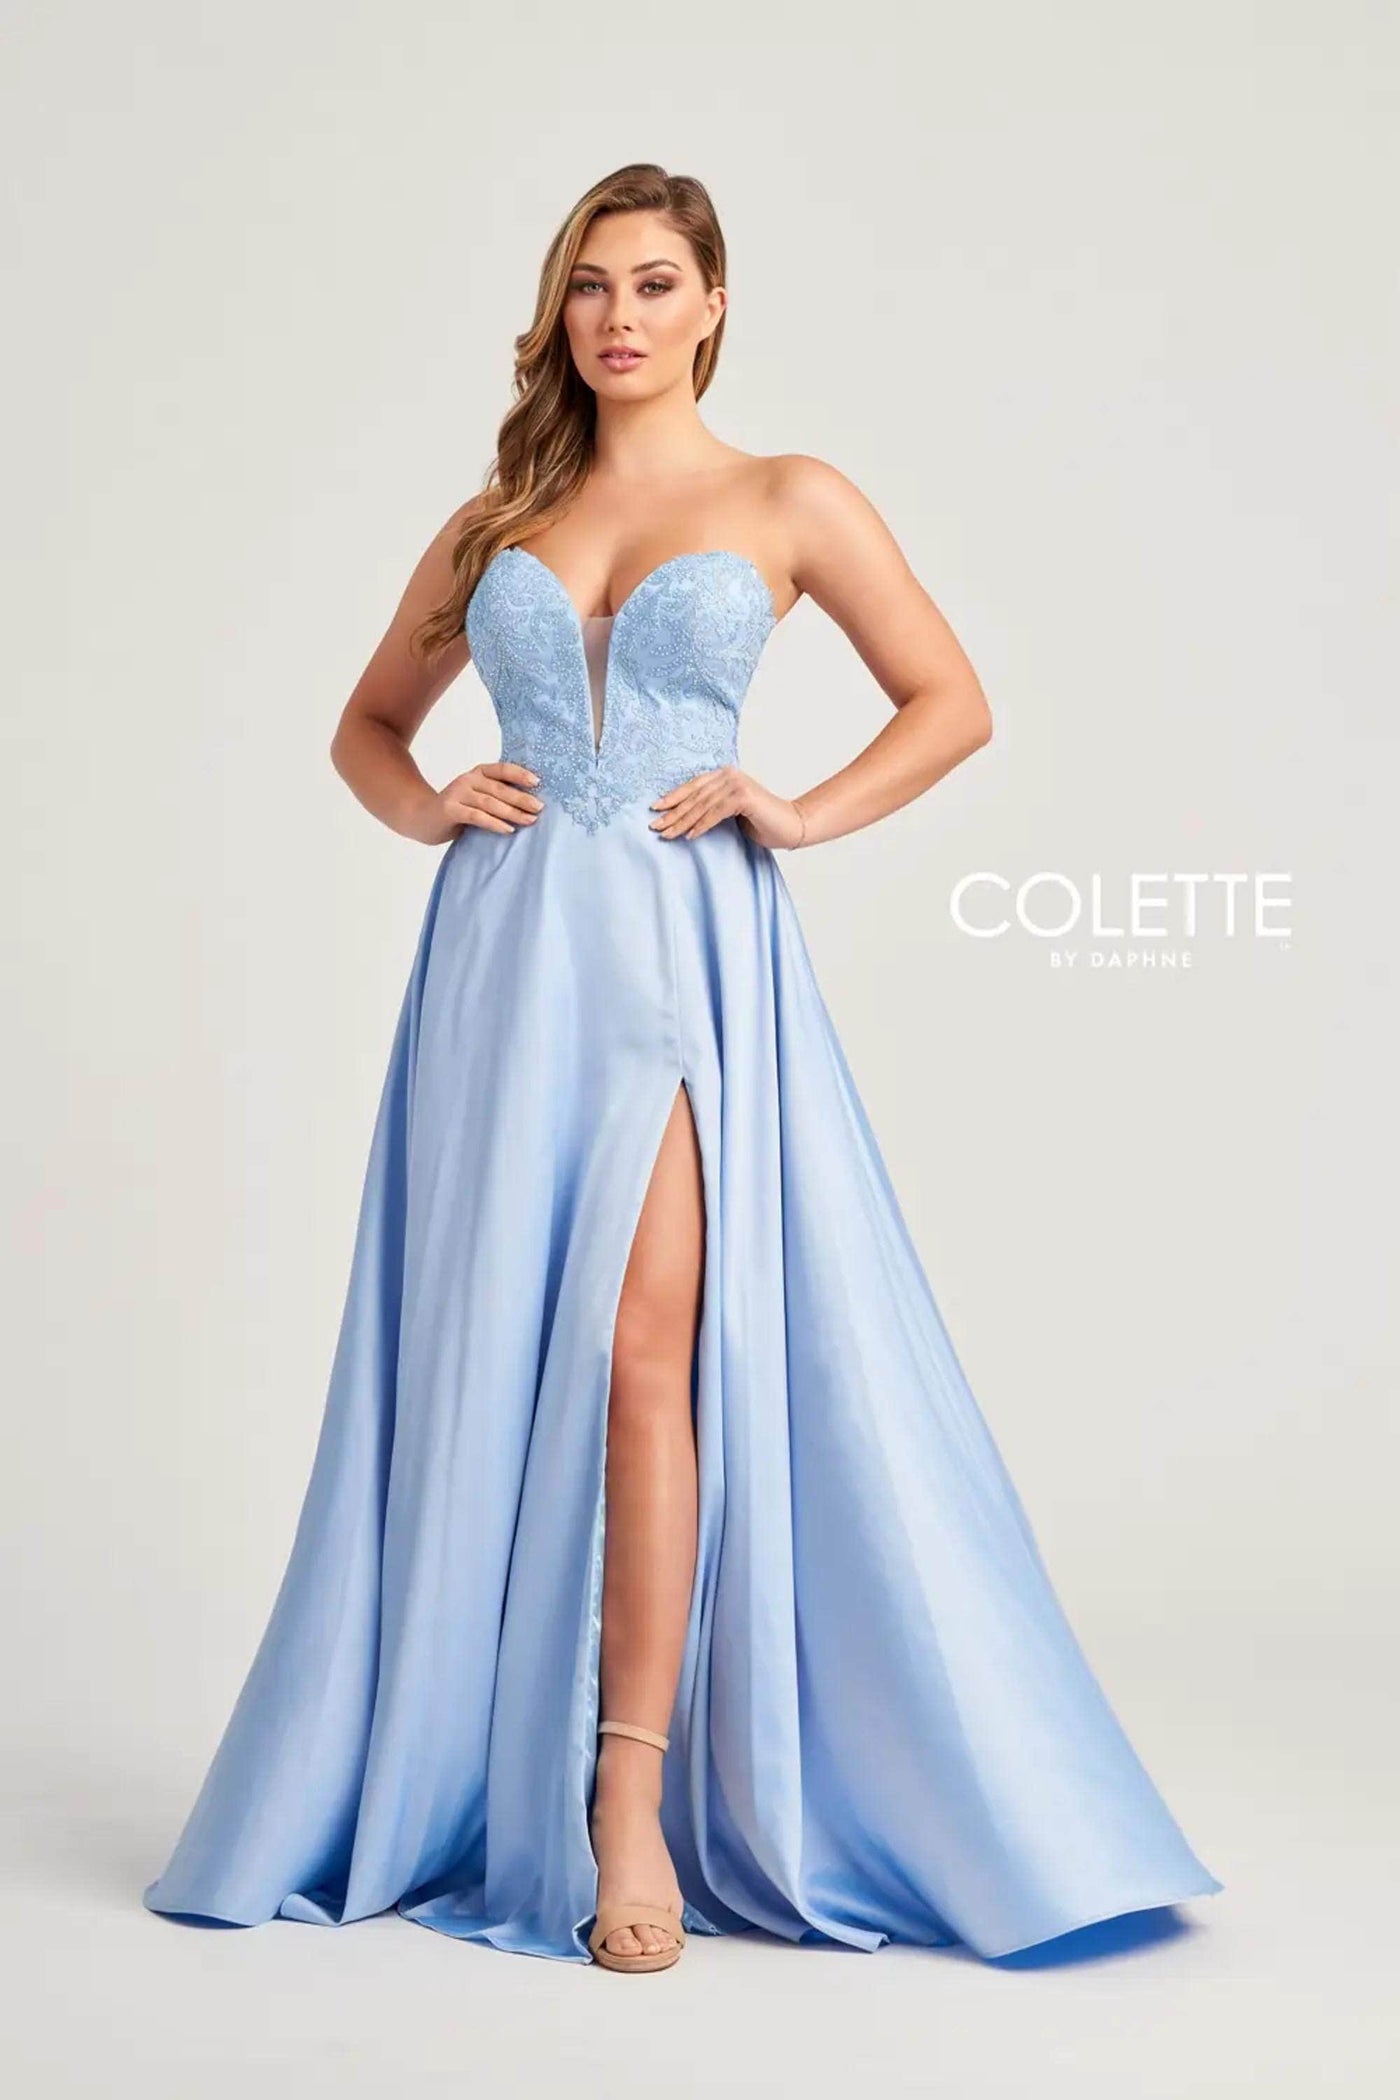 Colette By Daphne CL5142 - Embellished Sweetheart Prom Dress